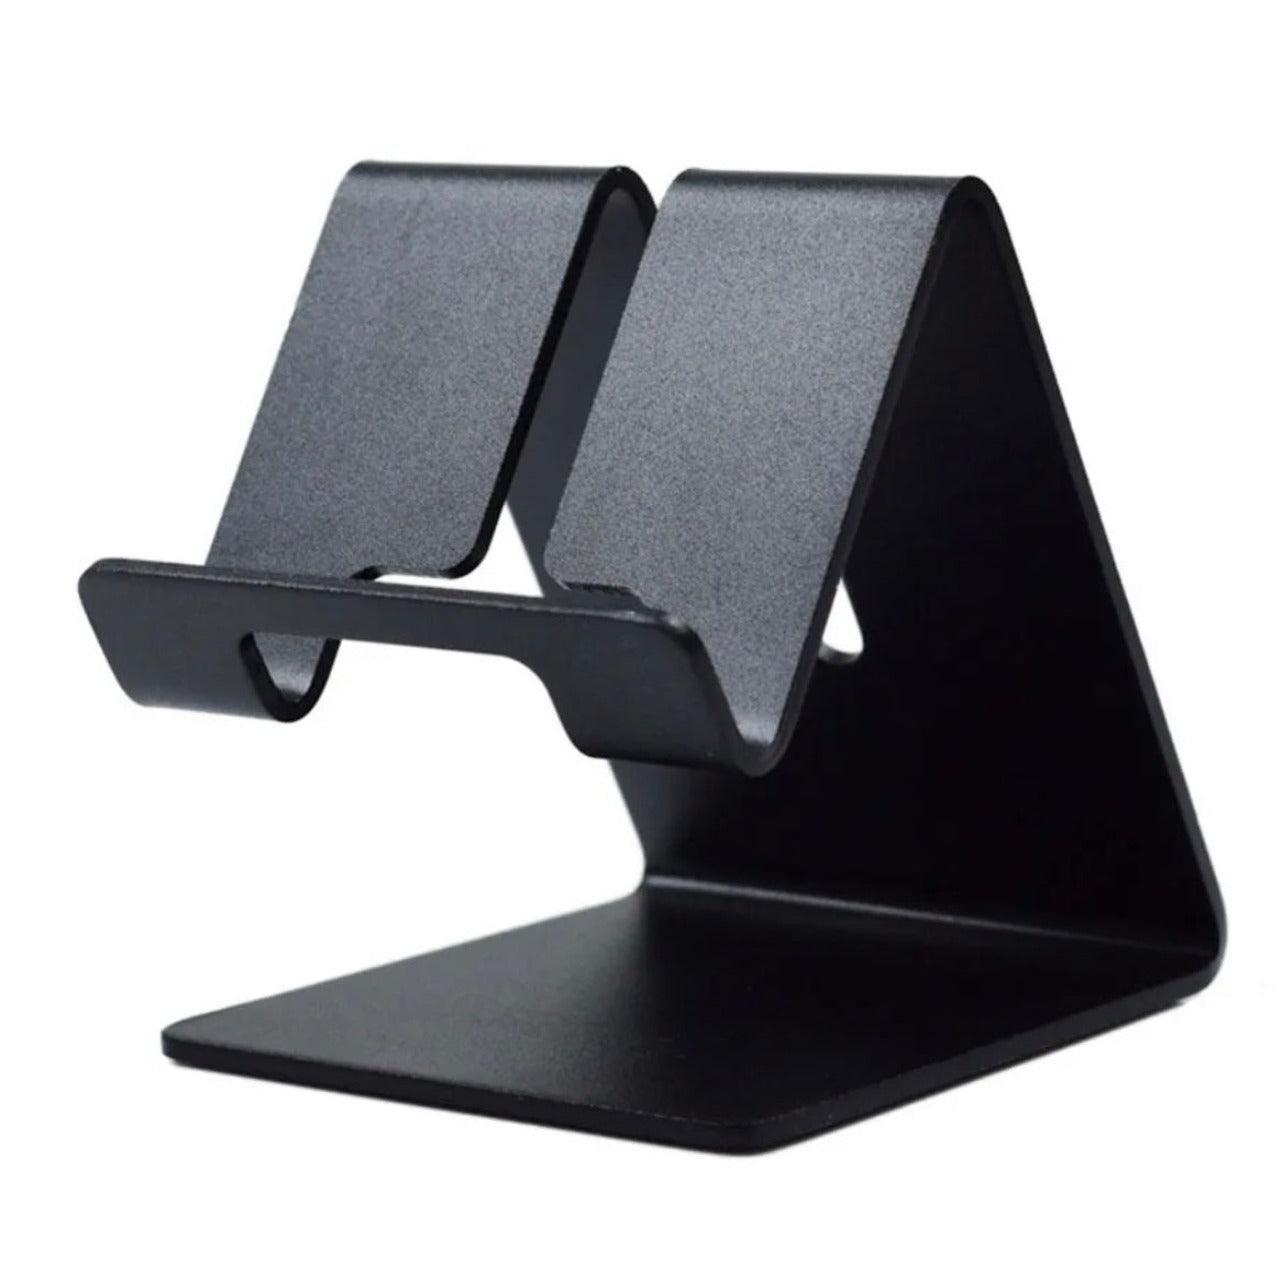 Phone Stand - Expat Life Style